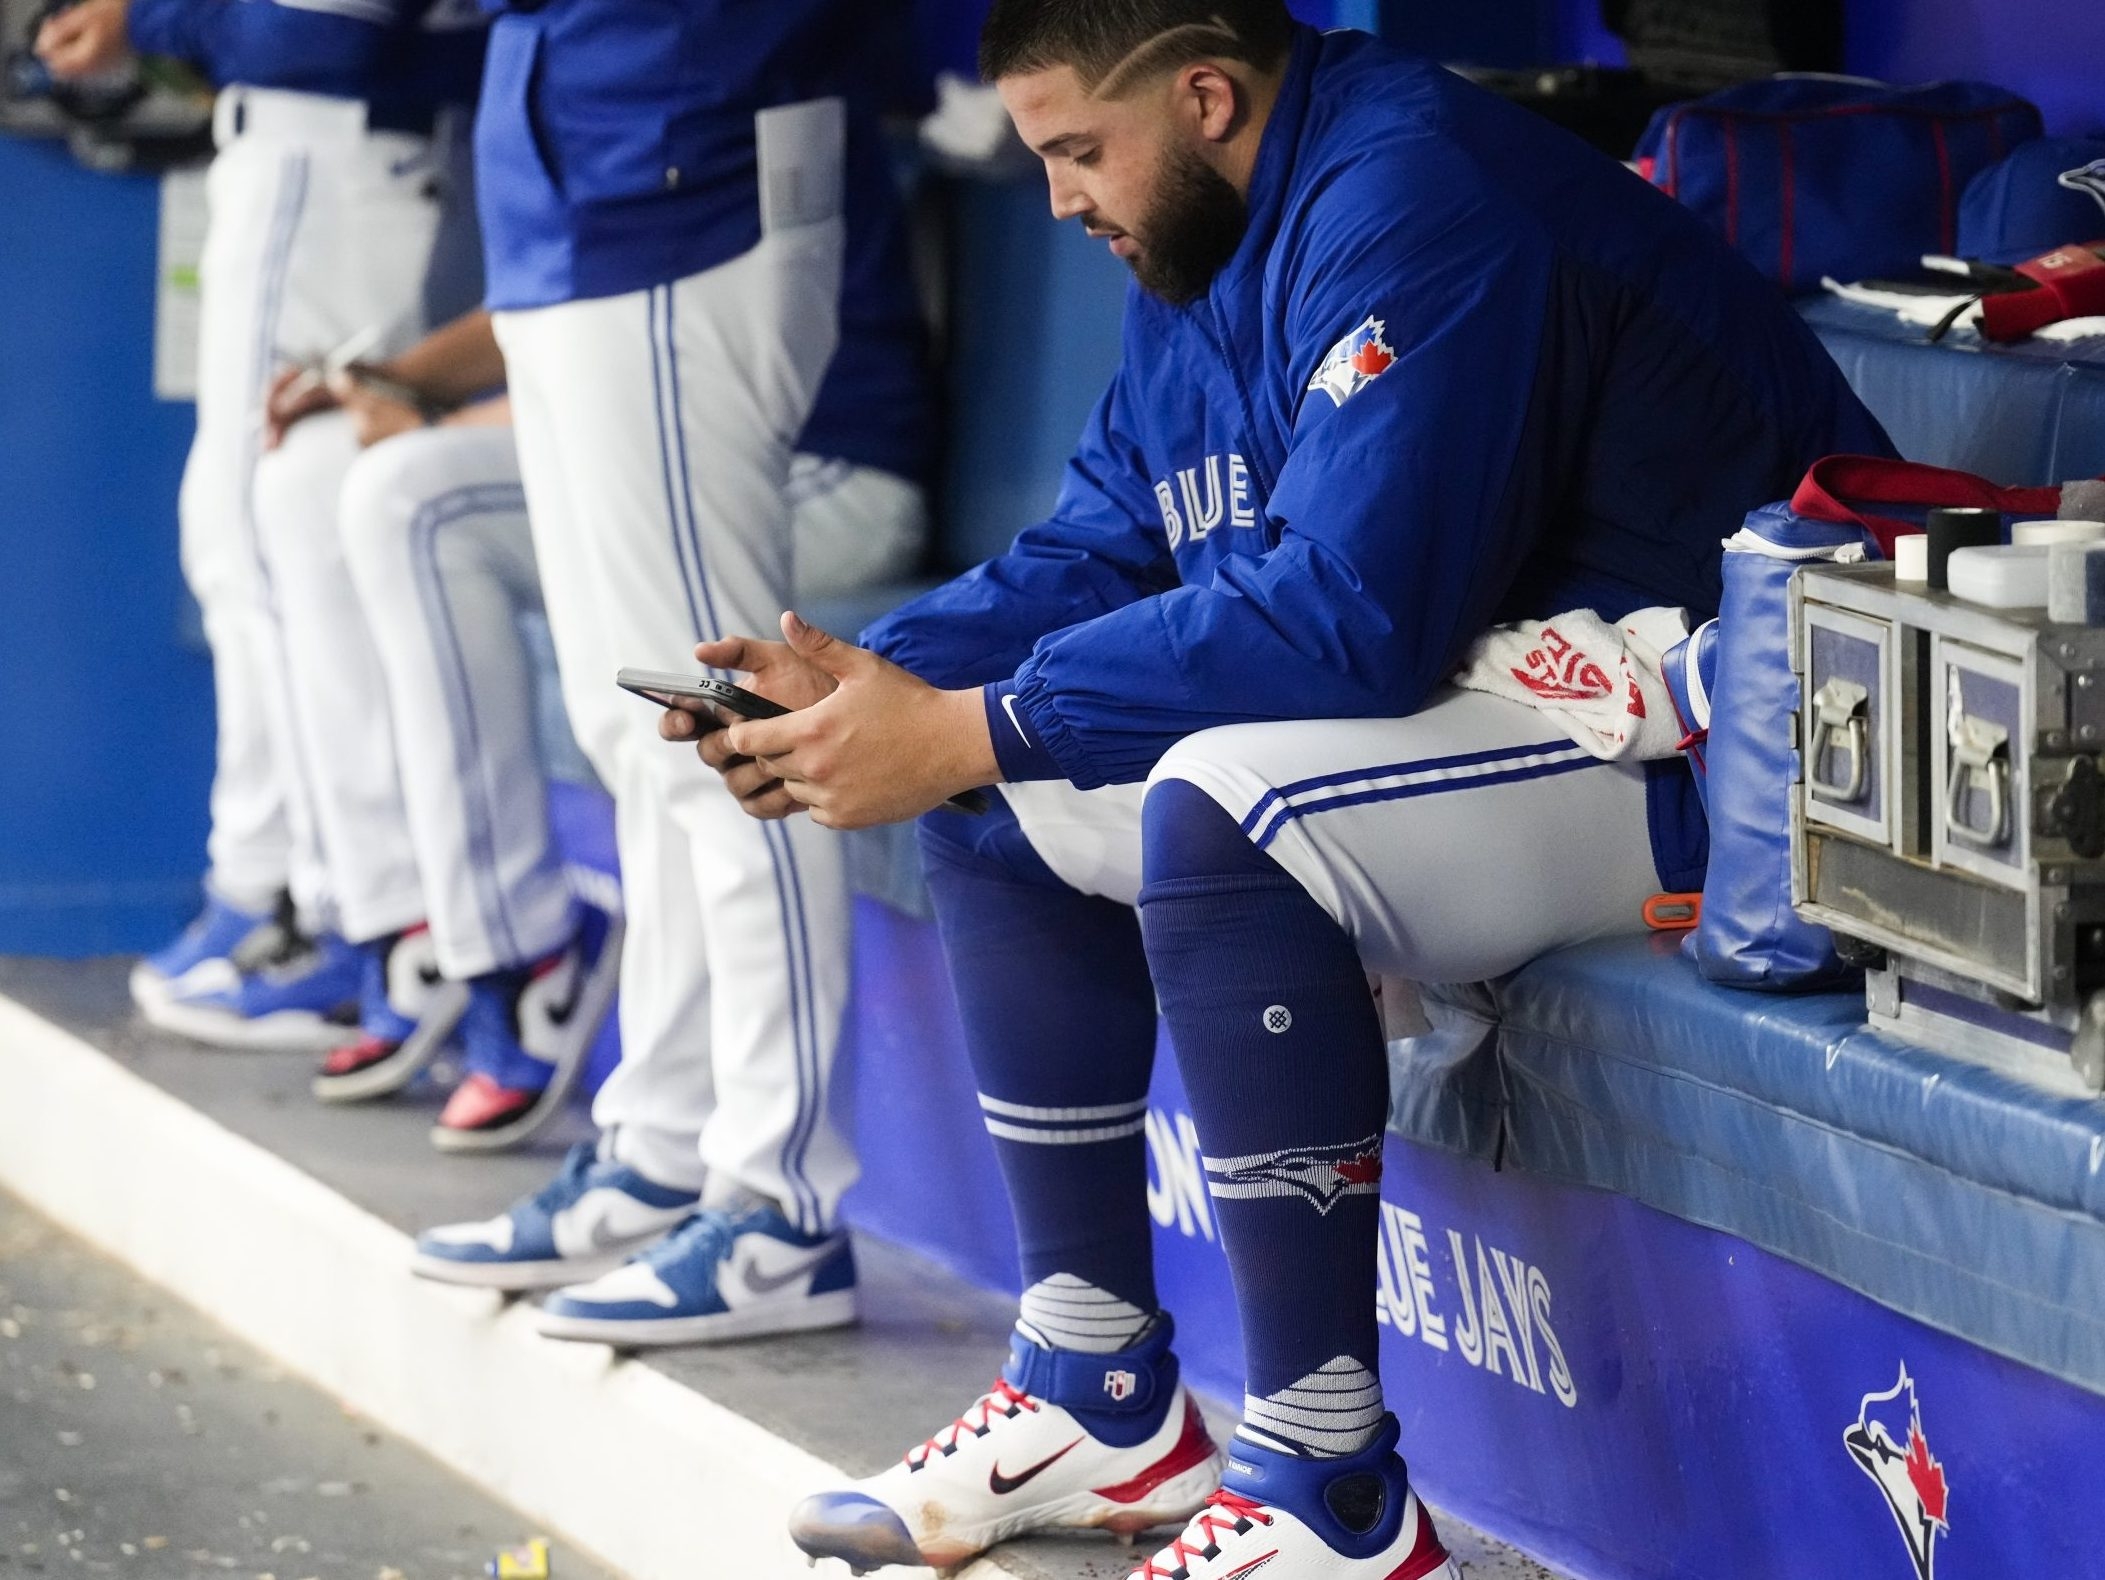 Pressing Questions: The Toronto Blue Jays